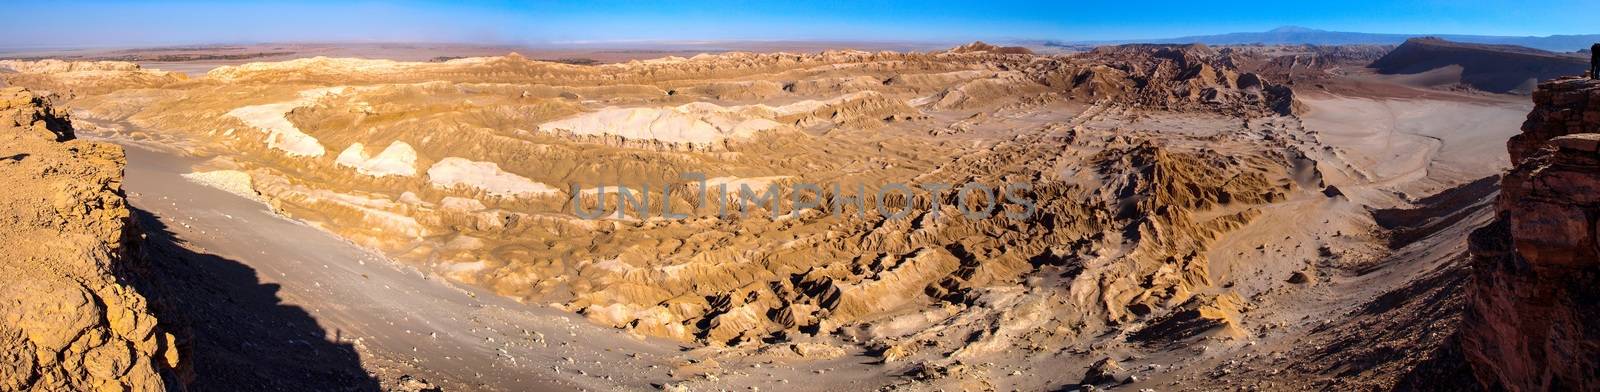 Atacama Death Valley Panorama by pyty